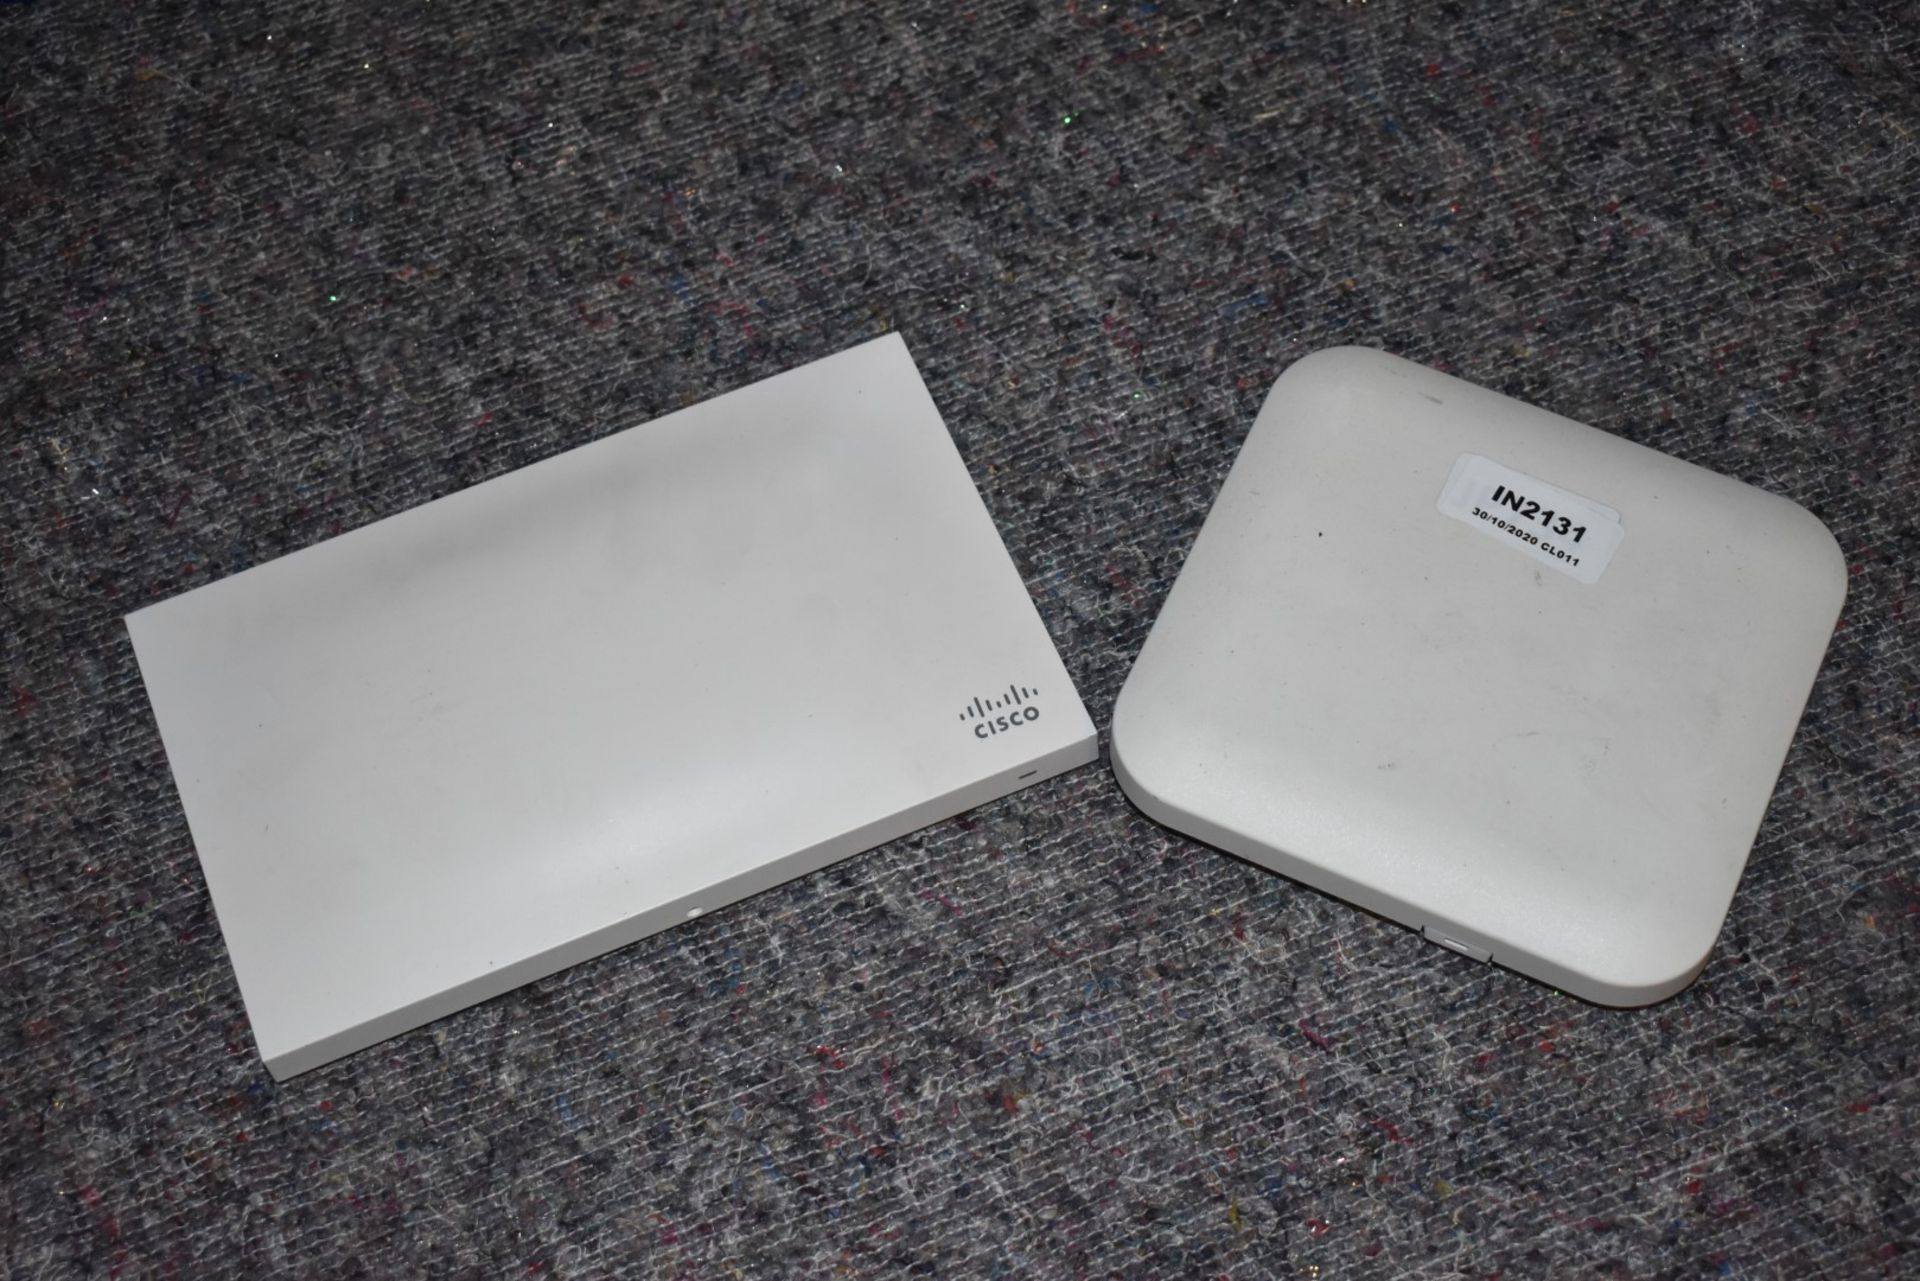 1 x Wireless Access Points - Types Include Cisco Meraki MR32 and Symbol AP-7522 - Ref: In2131 wh1 - Image 2 of 4